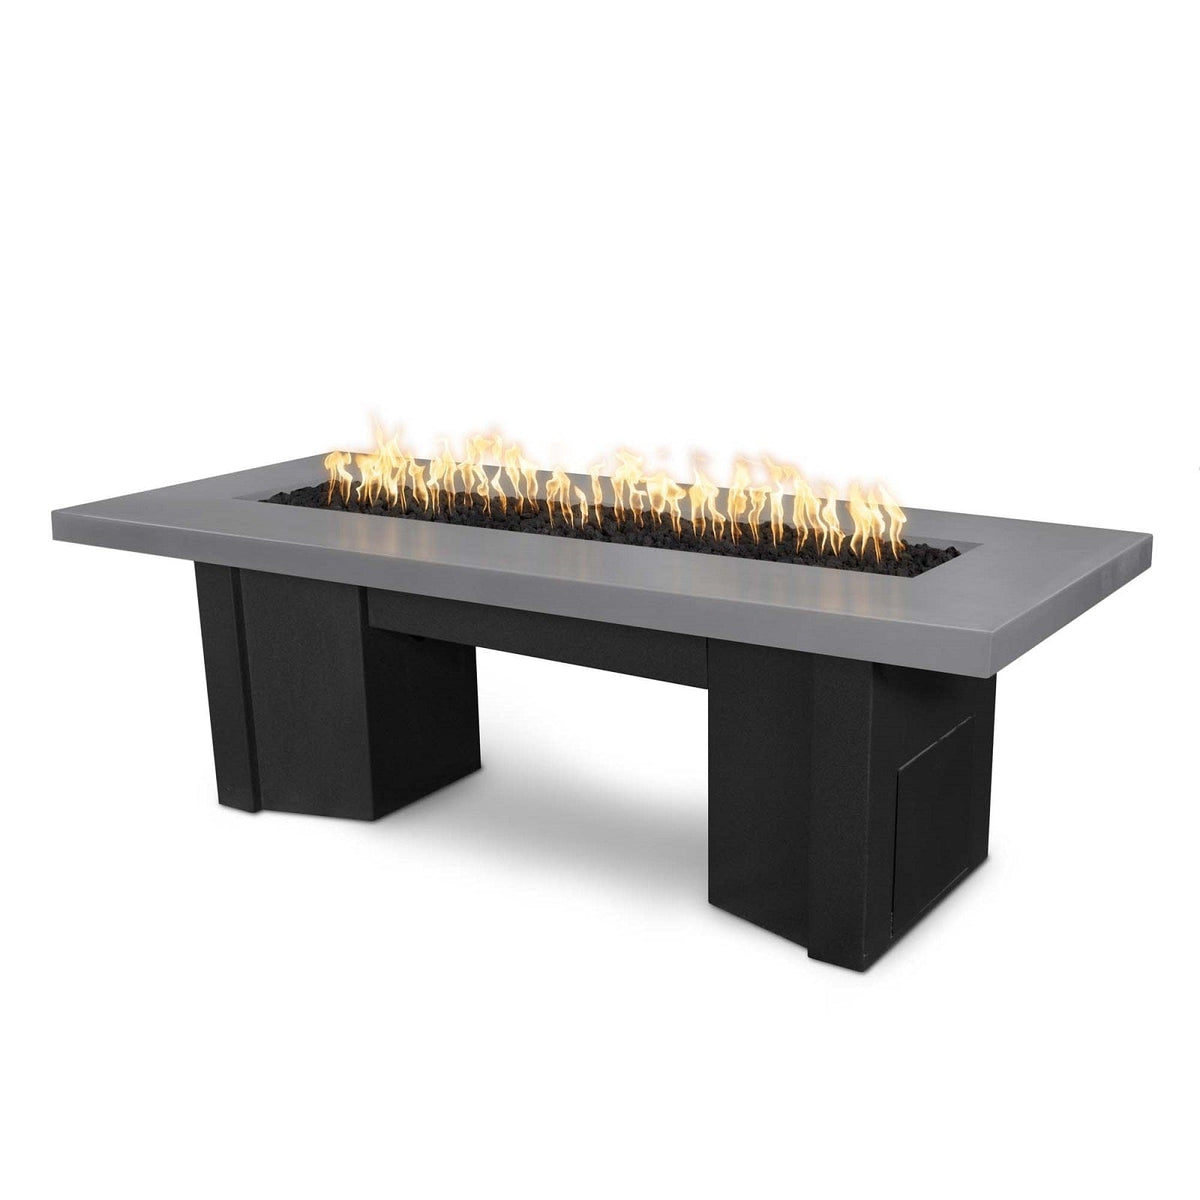 The Outdoor Plus Fire Features Natural Gray (-NGY) / Black Powder Coated Steel (-BLK) The Outdoor Plus 78&quot; Alameda Fire Table Smooth Concrete in Natural Gas - Match Lit with Flame Sense System / OPT-ALMGFRC78FSML-NG